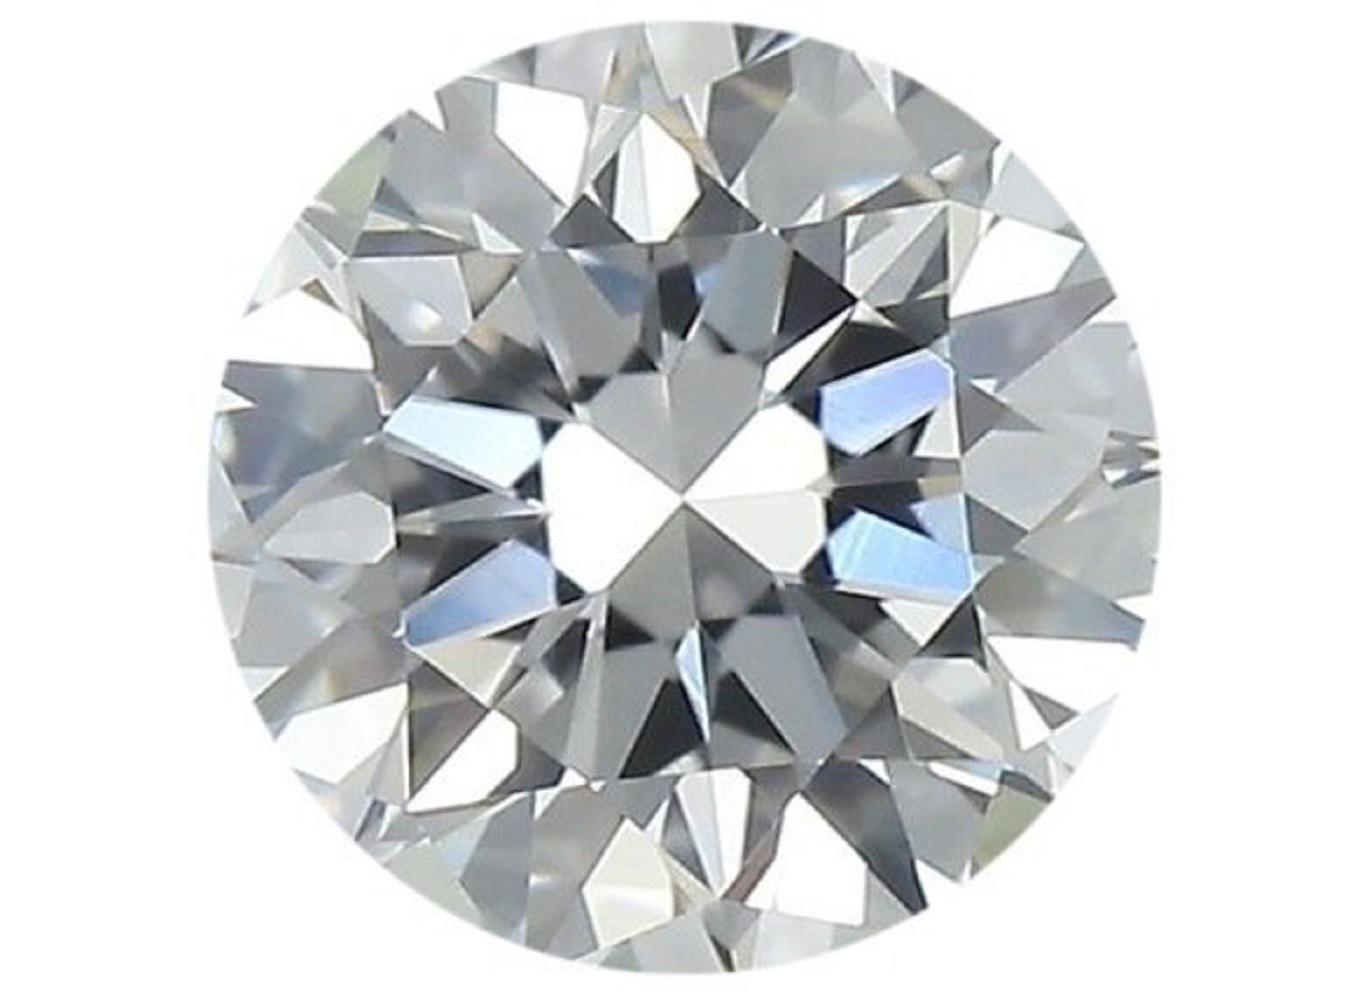 1 sparkling natural round brilliant diamond in a 1.04 carat D IF with excellent cut. This diamond comes with IGI Certificate and laser inscription number.

SKU: MKN-219
IGI 557255266